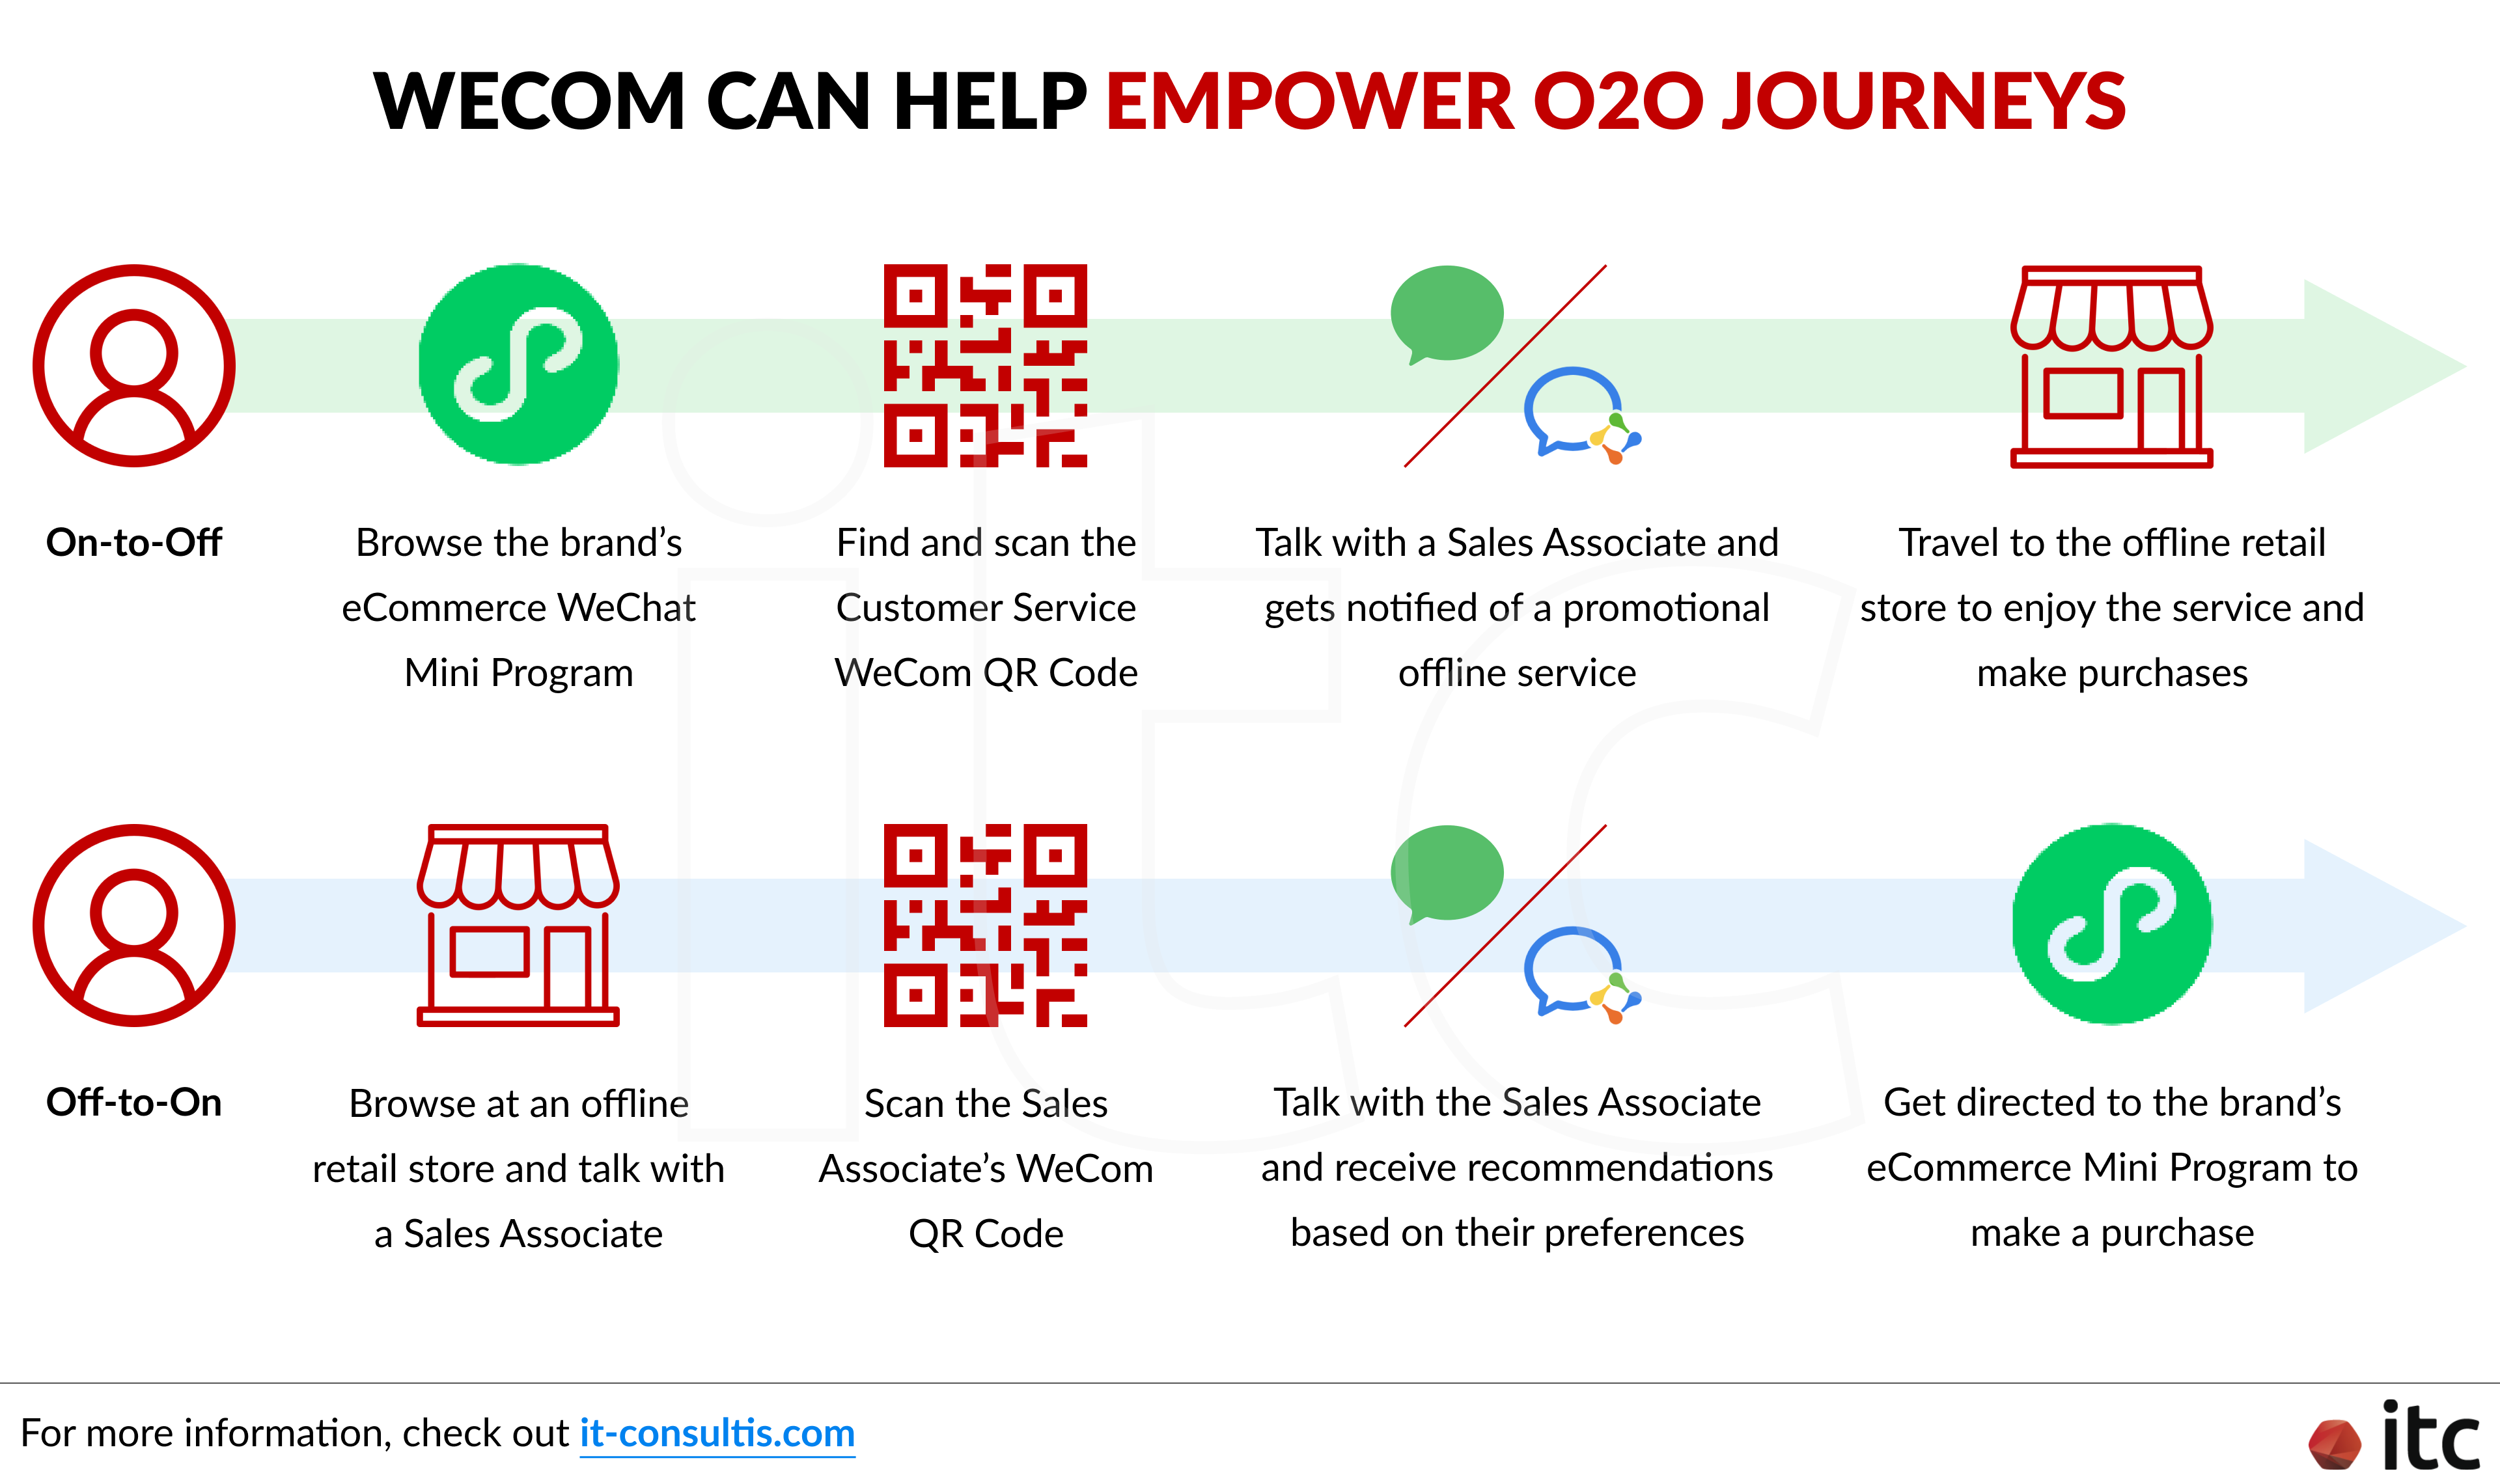 WeCom can help empower Online-to-Offline and Offline-to-Online (O2O) customer journeys